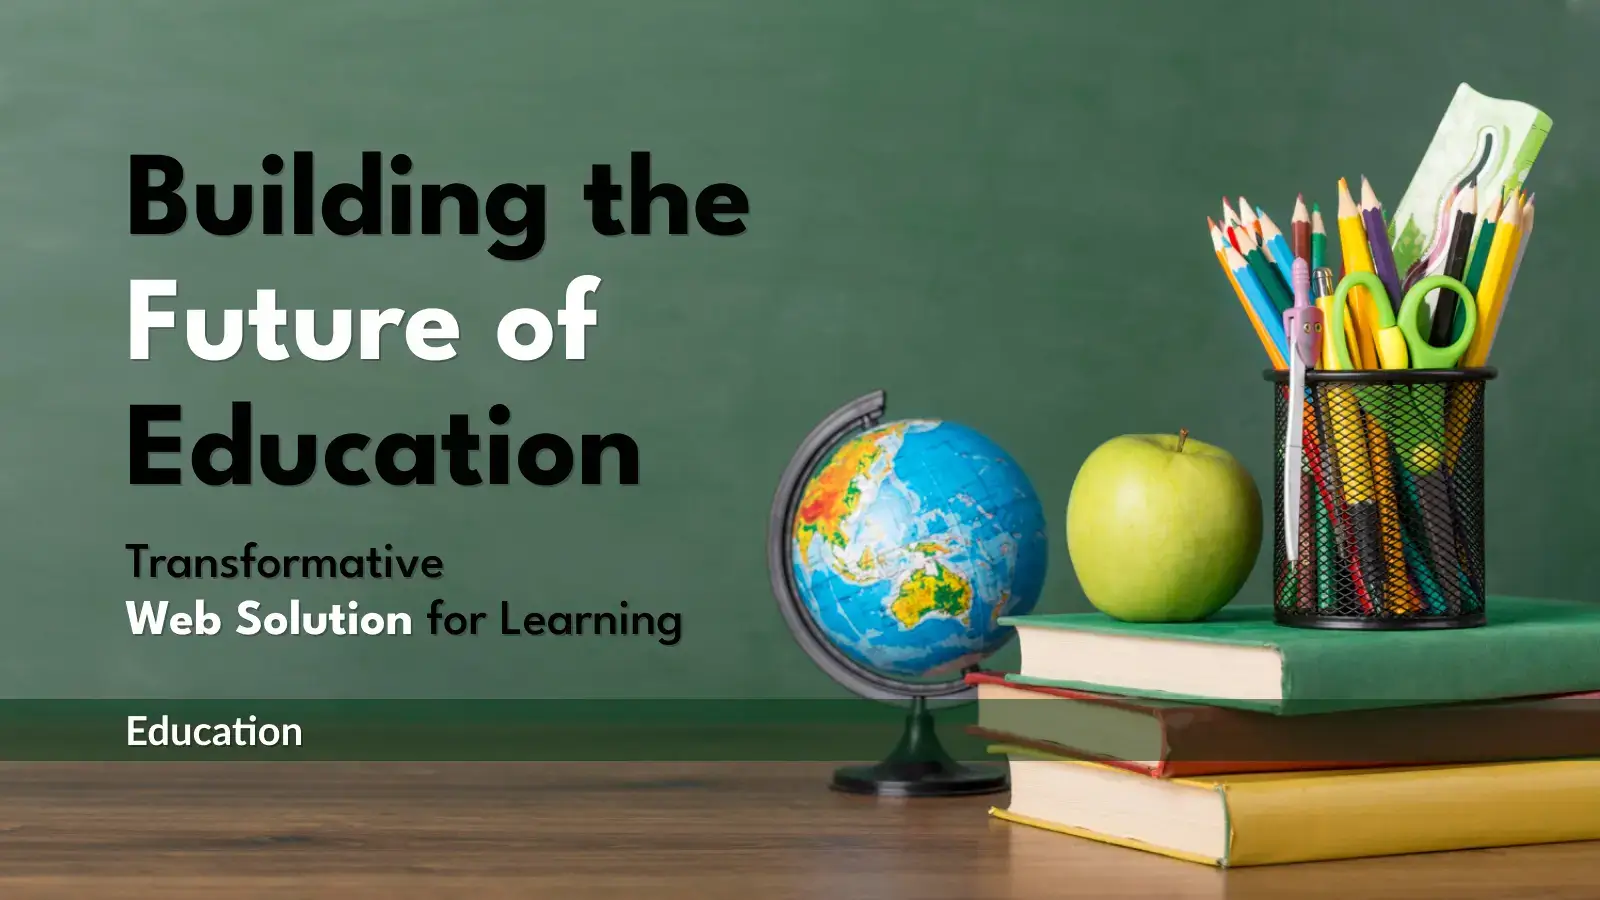 Education-Building the Future of :- Transformative Web Solutions for Learning